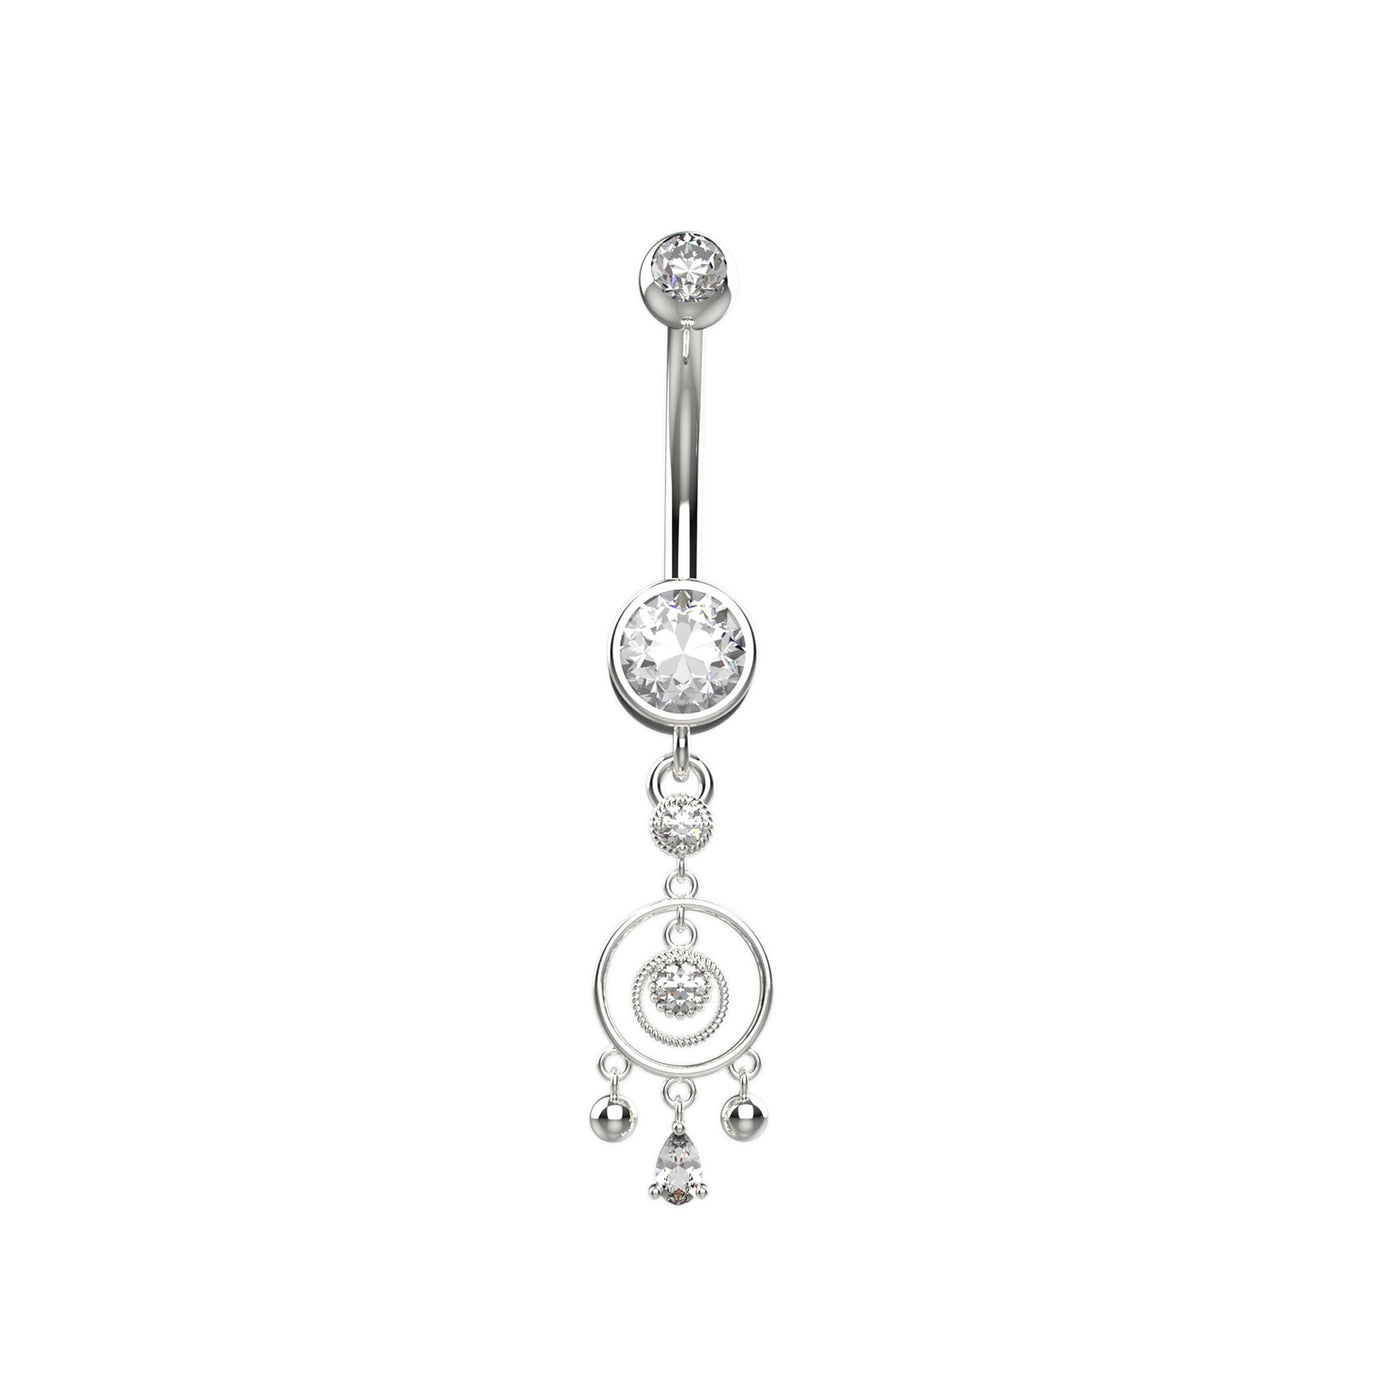 14G Double Round Belly Piercing Ring